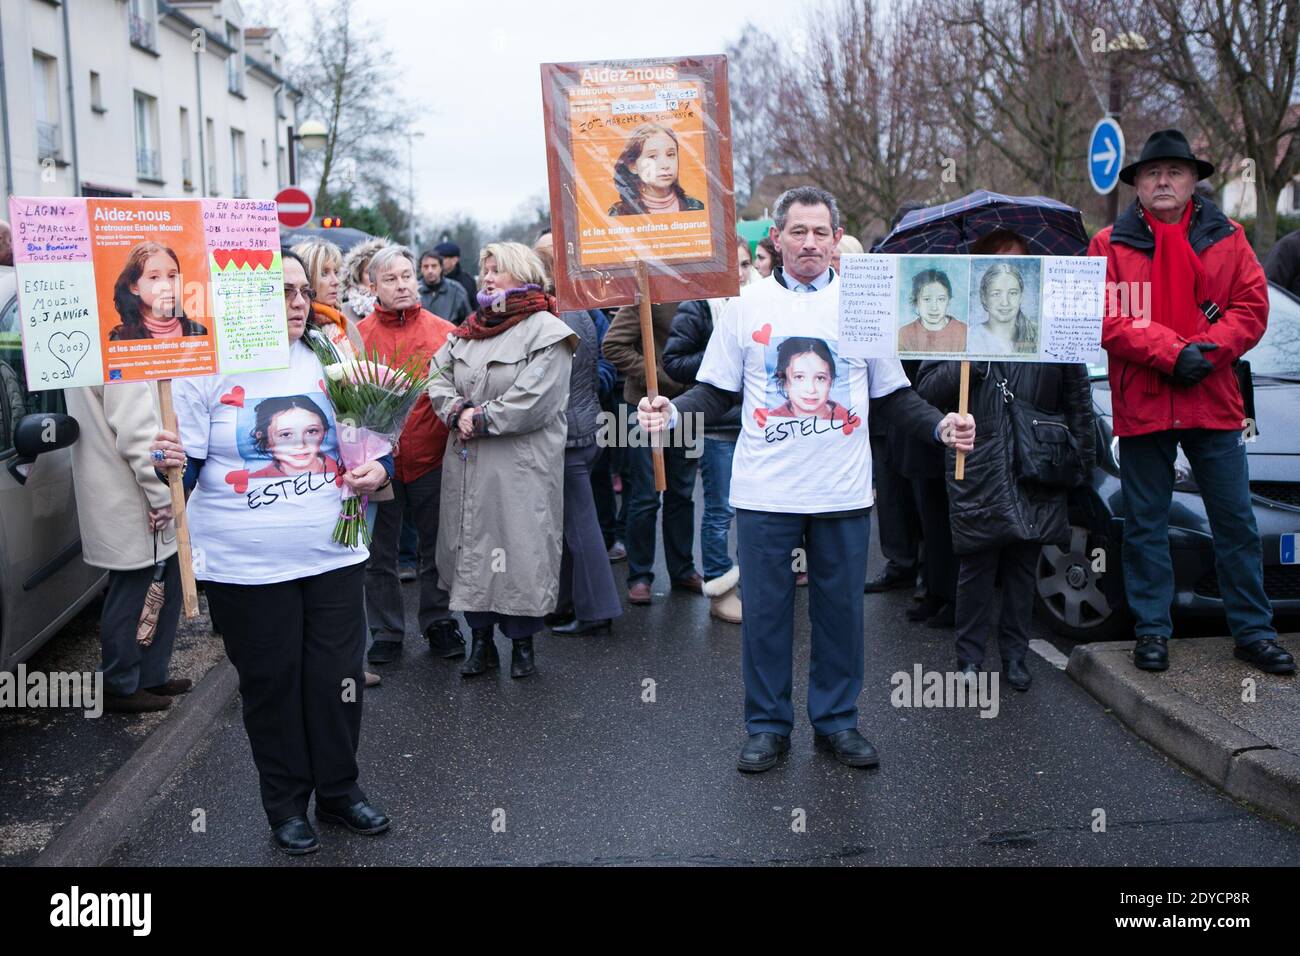 People participate in a march in memory of missing Estelle Mouzin in Guermantes, France on January 13, 2013. Estelle, aged 9, disappeared on her way home from school on Thursday 9th January, 2003. Photo by Audrey Poree/ABACAPRESS.COM Stock Photo